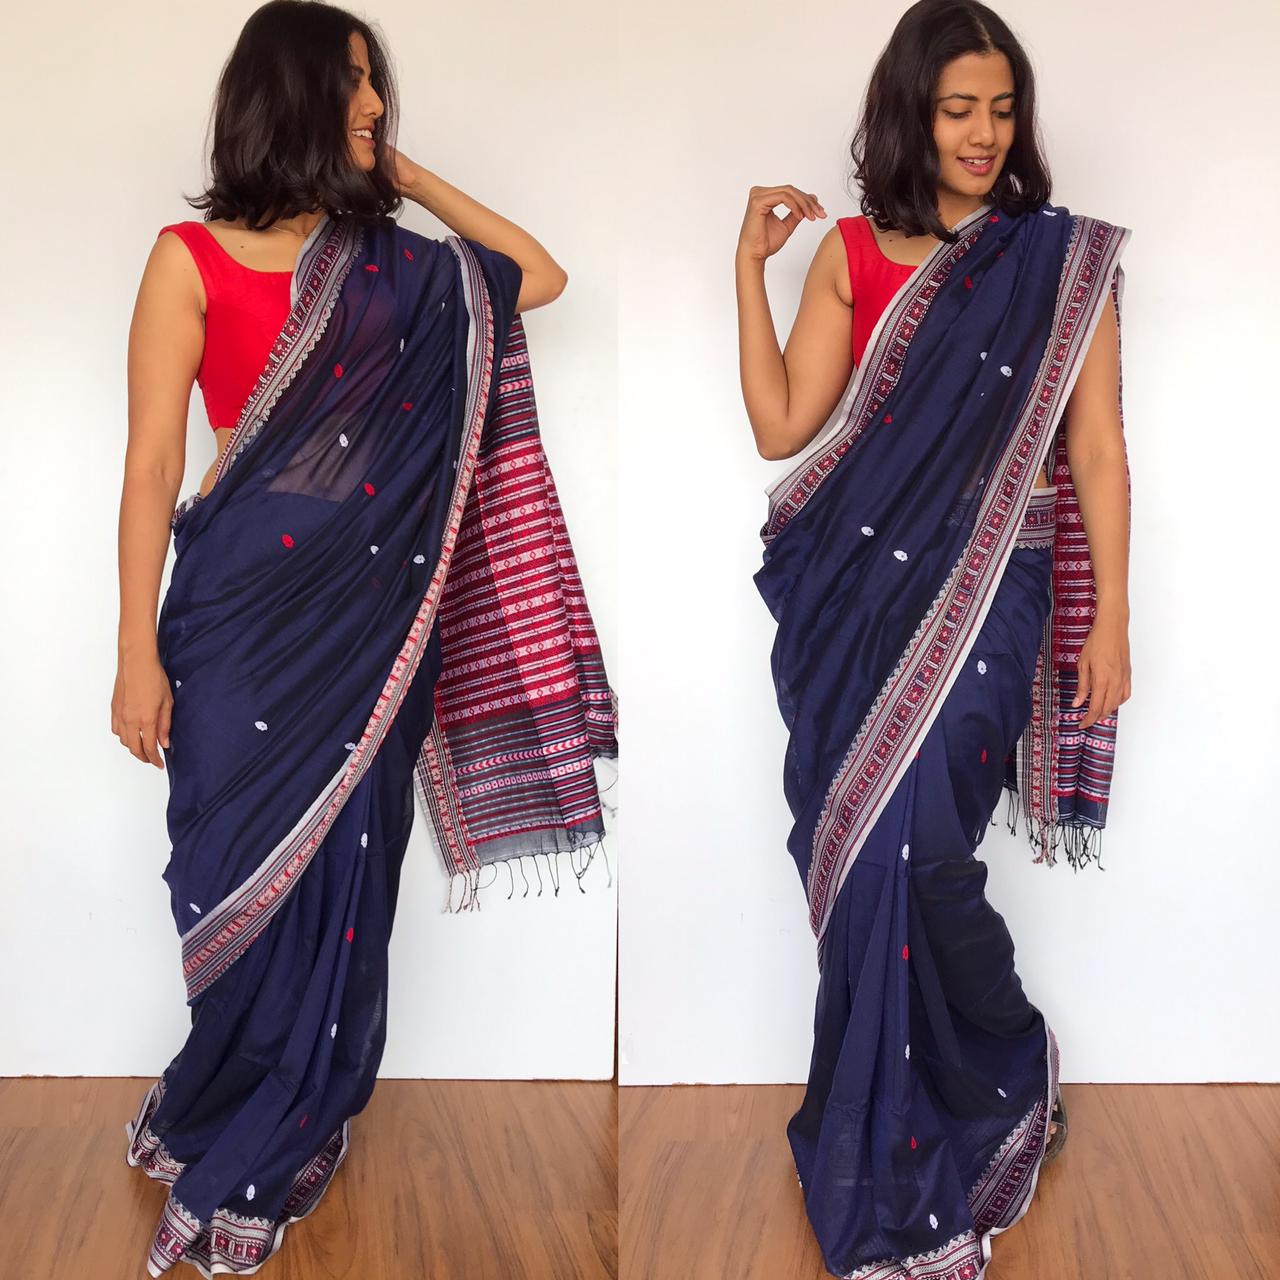 Learn About the Different Types of Saree Fabrics – ONE MINUTE SAREE